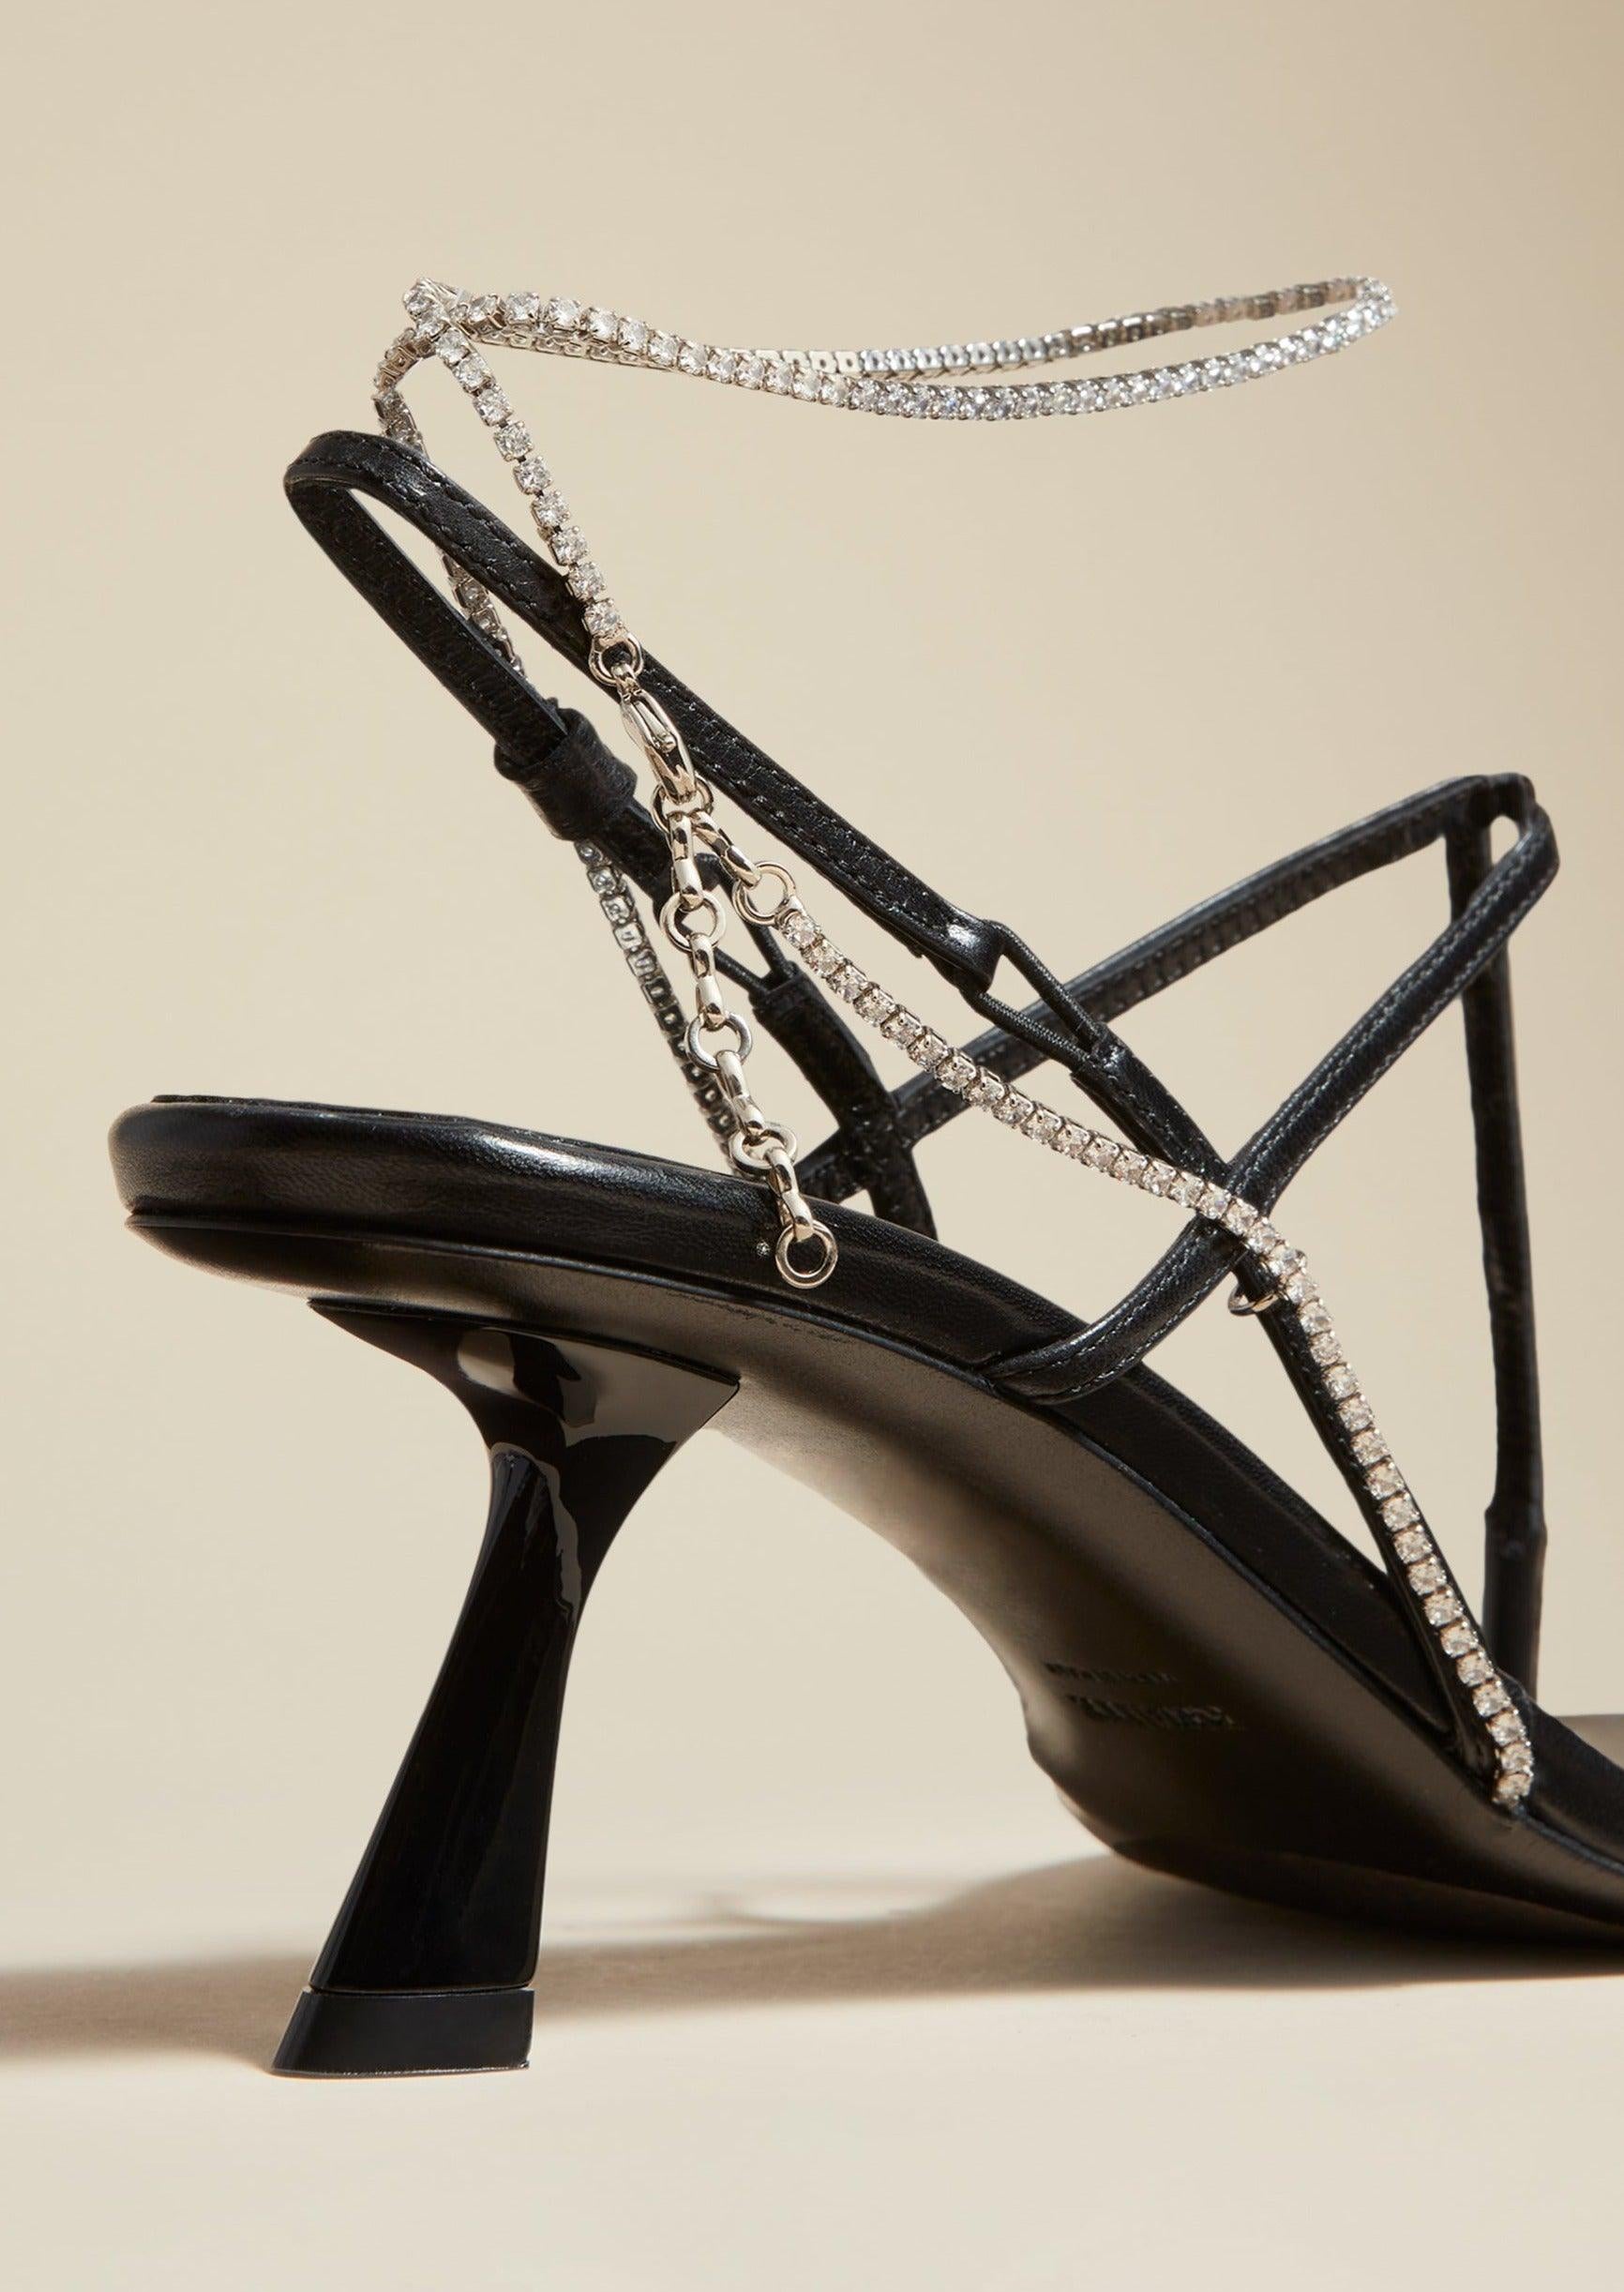 The Linden Sandal in Black with Crystals - The Iconic Issue